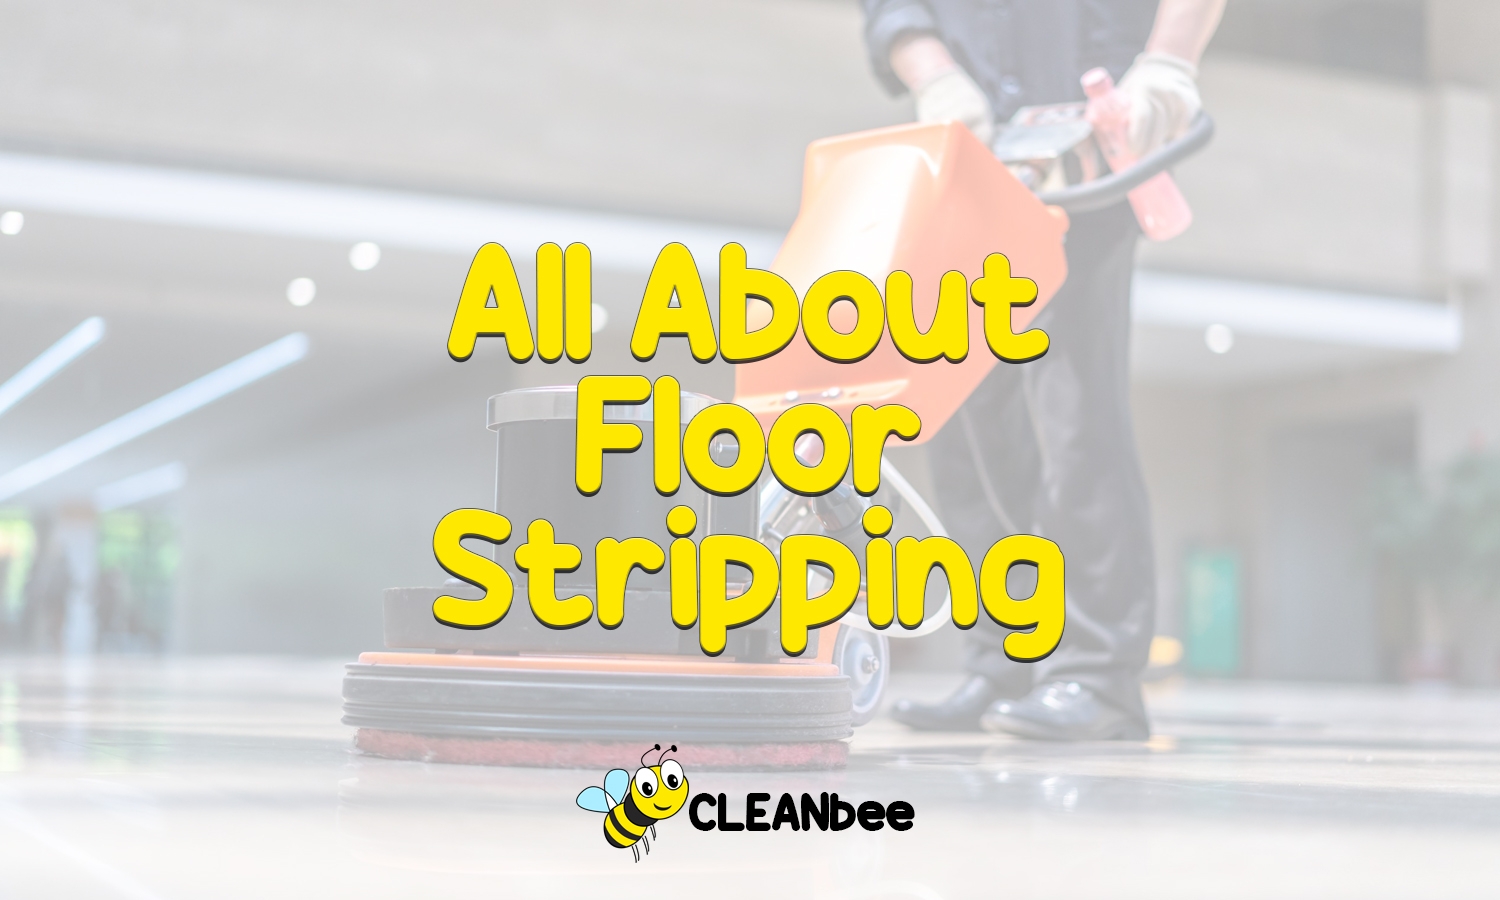 All About Floor Stripping